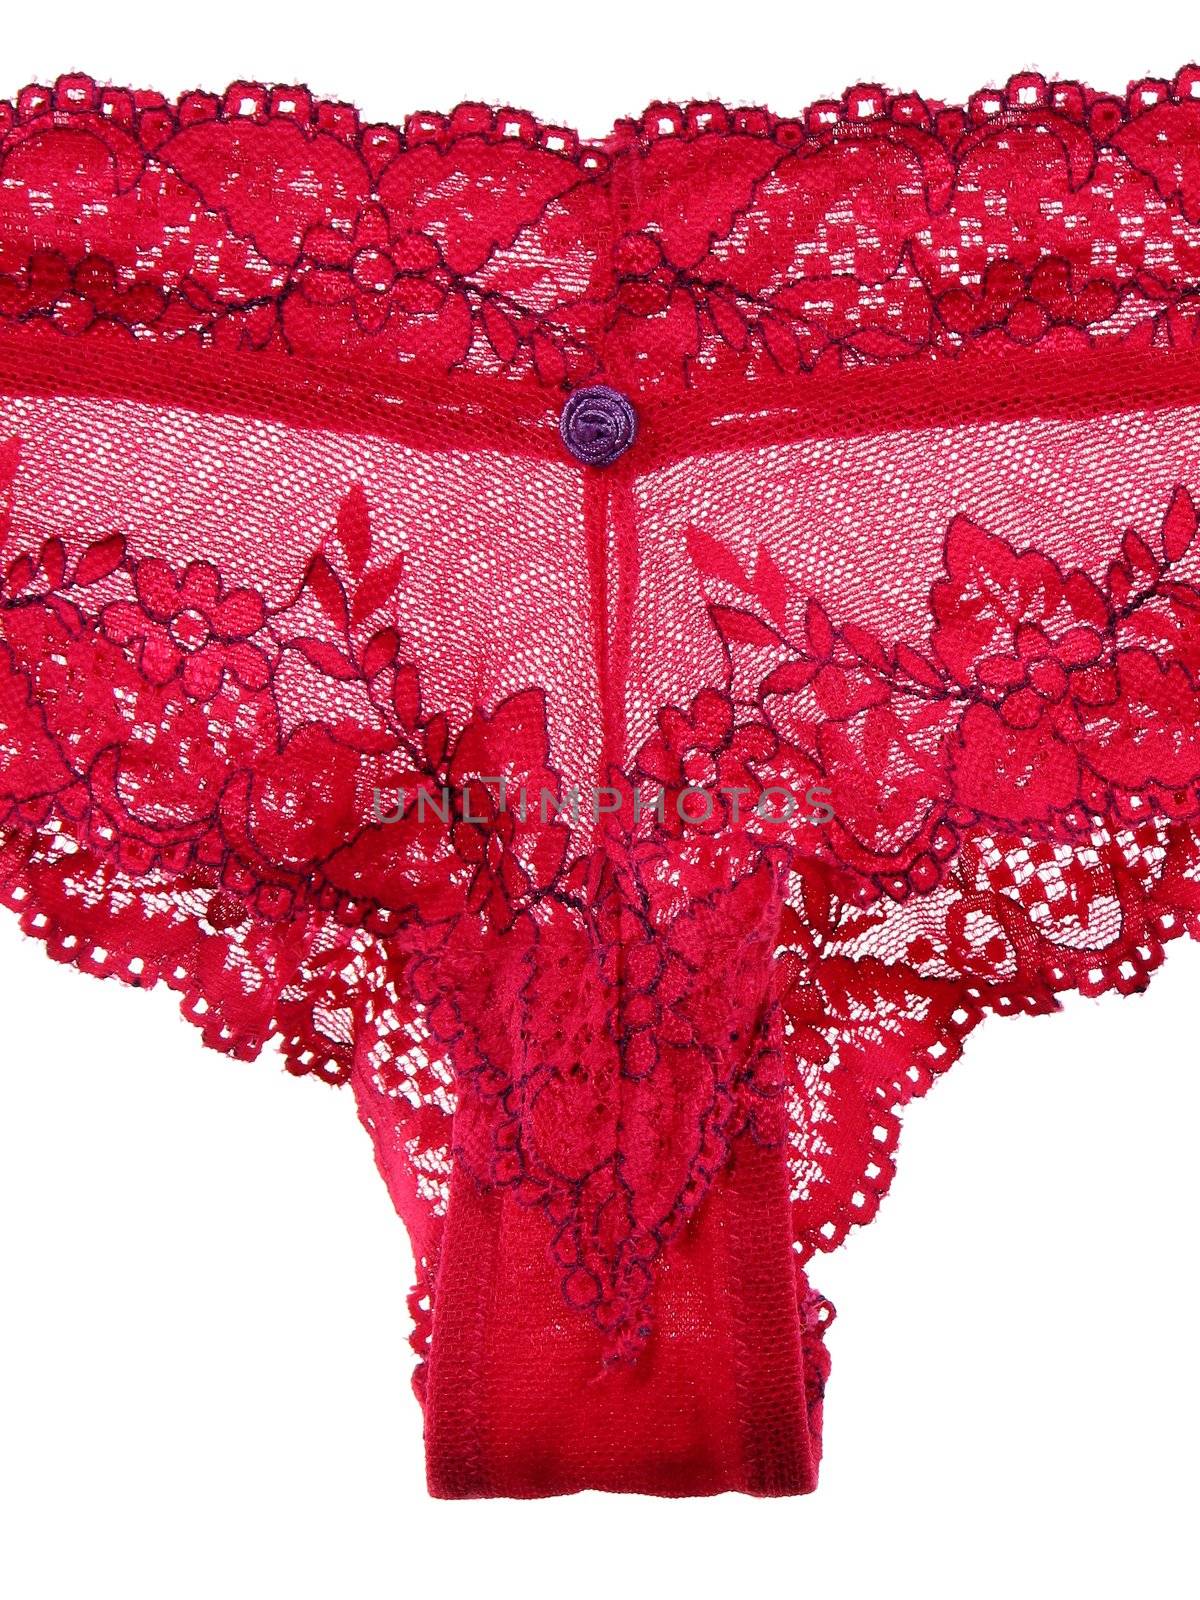 Sexy lingerie. Closeup of red lacy panties on white background.